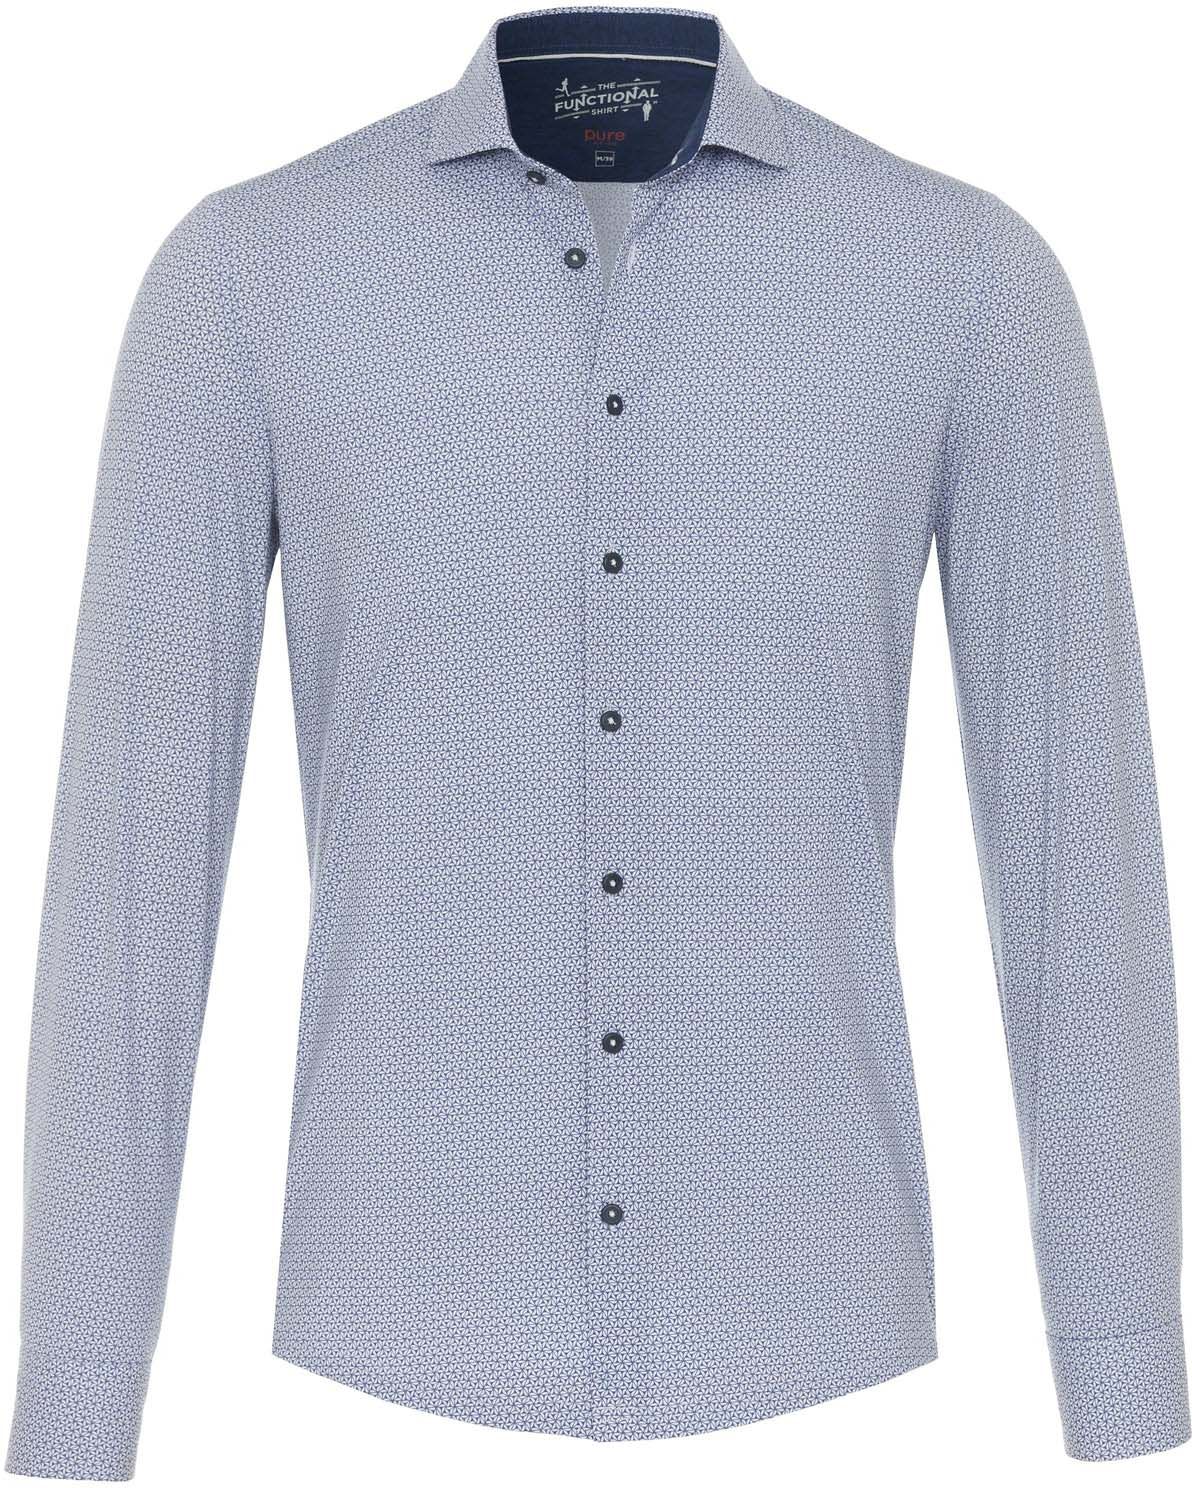 Pure H.Tico The Functional Shirt Dessin Blue size 15